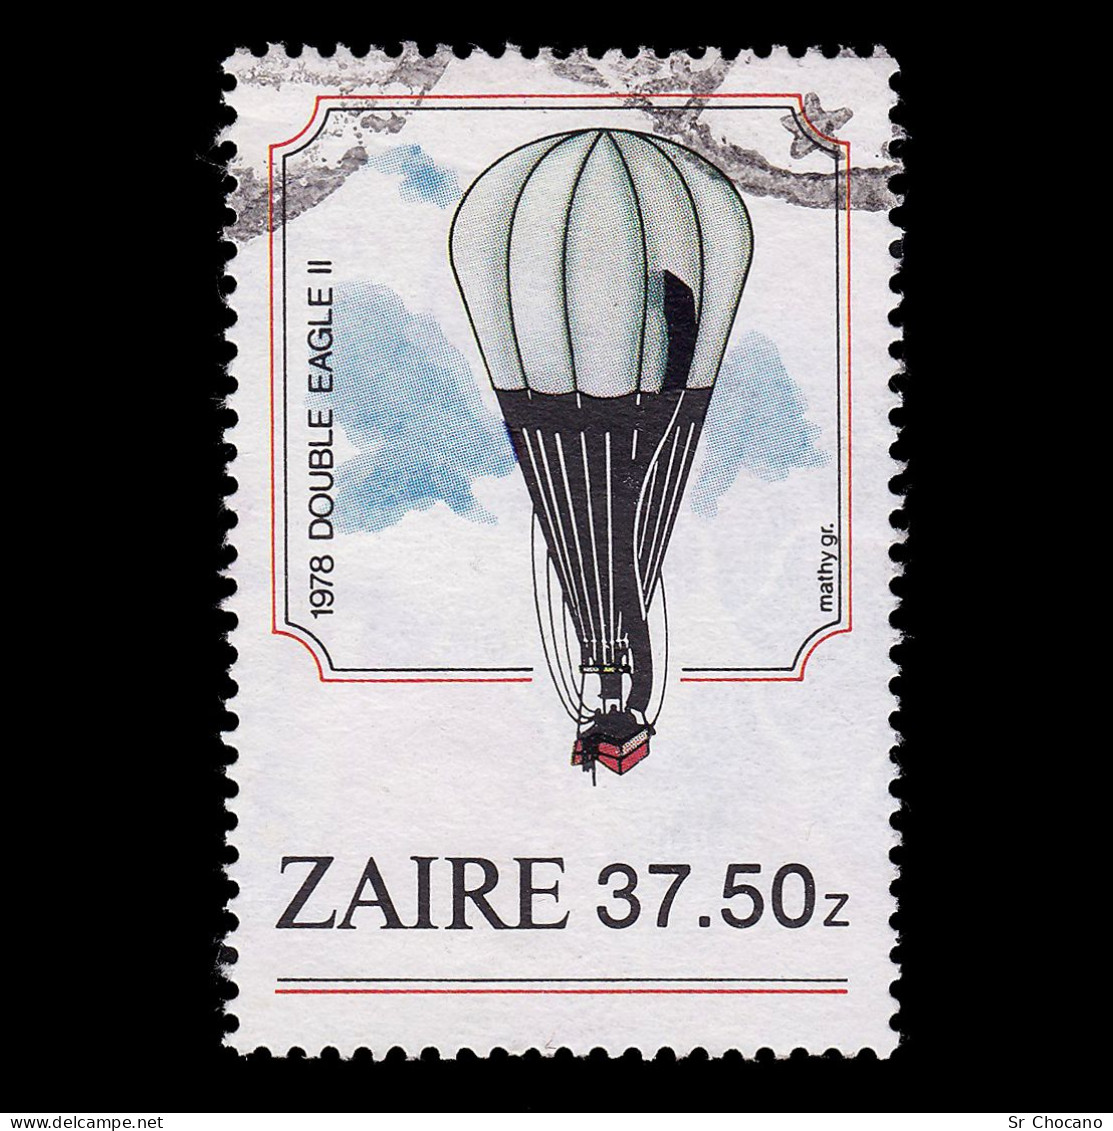 ZAIRE STAMP.1984.Double Eagle II, 37,50k.SCOTT 1166.USED. - Used Stamps